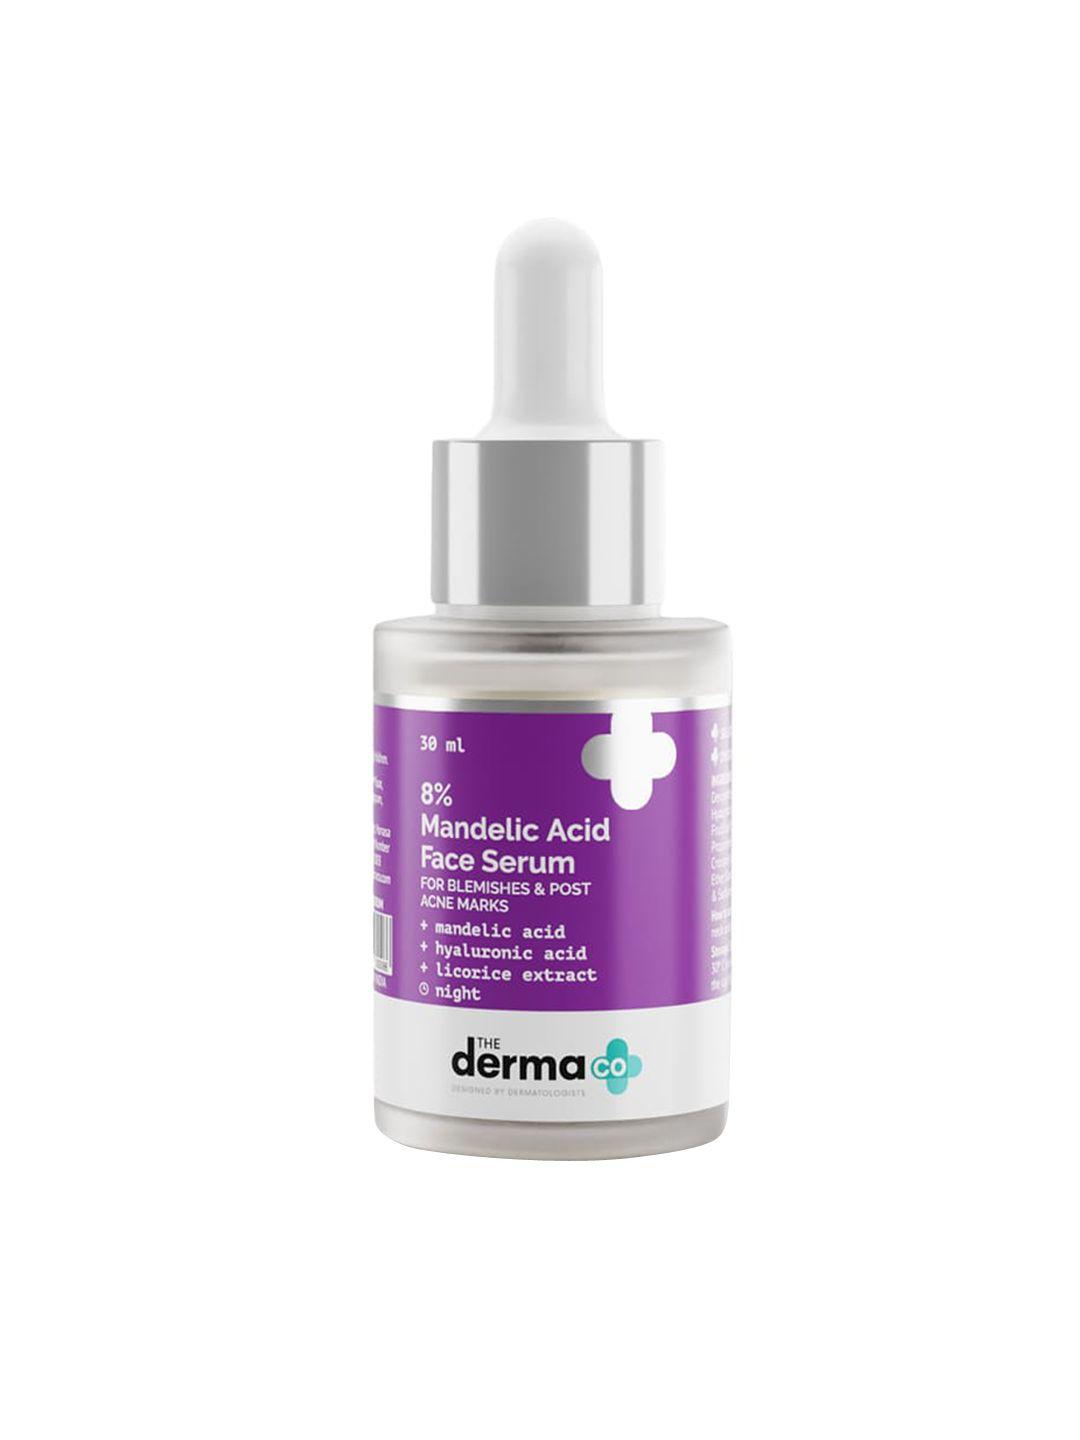 the derma co. 8% mandelic acid face serum with hyaluronic acid for post acne marks - 30 ml